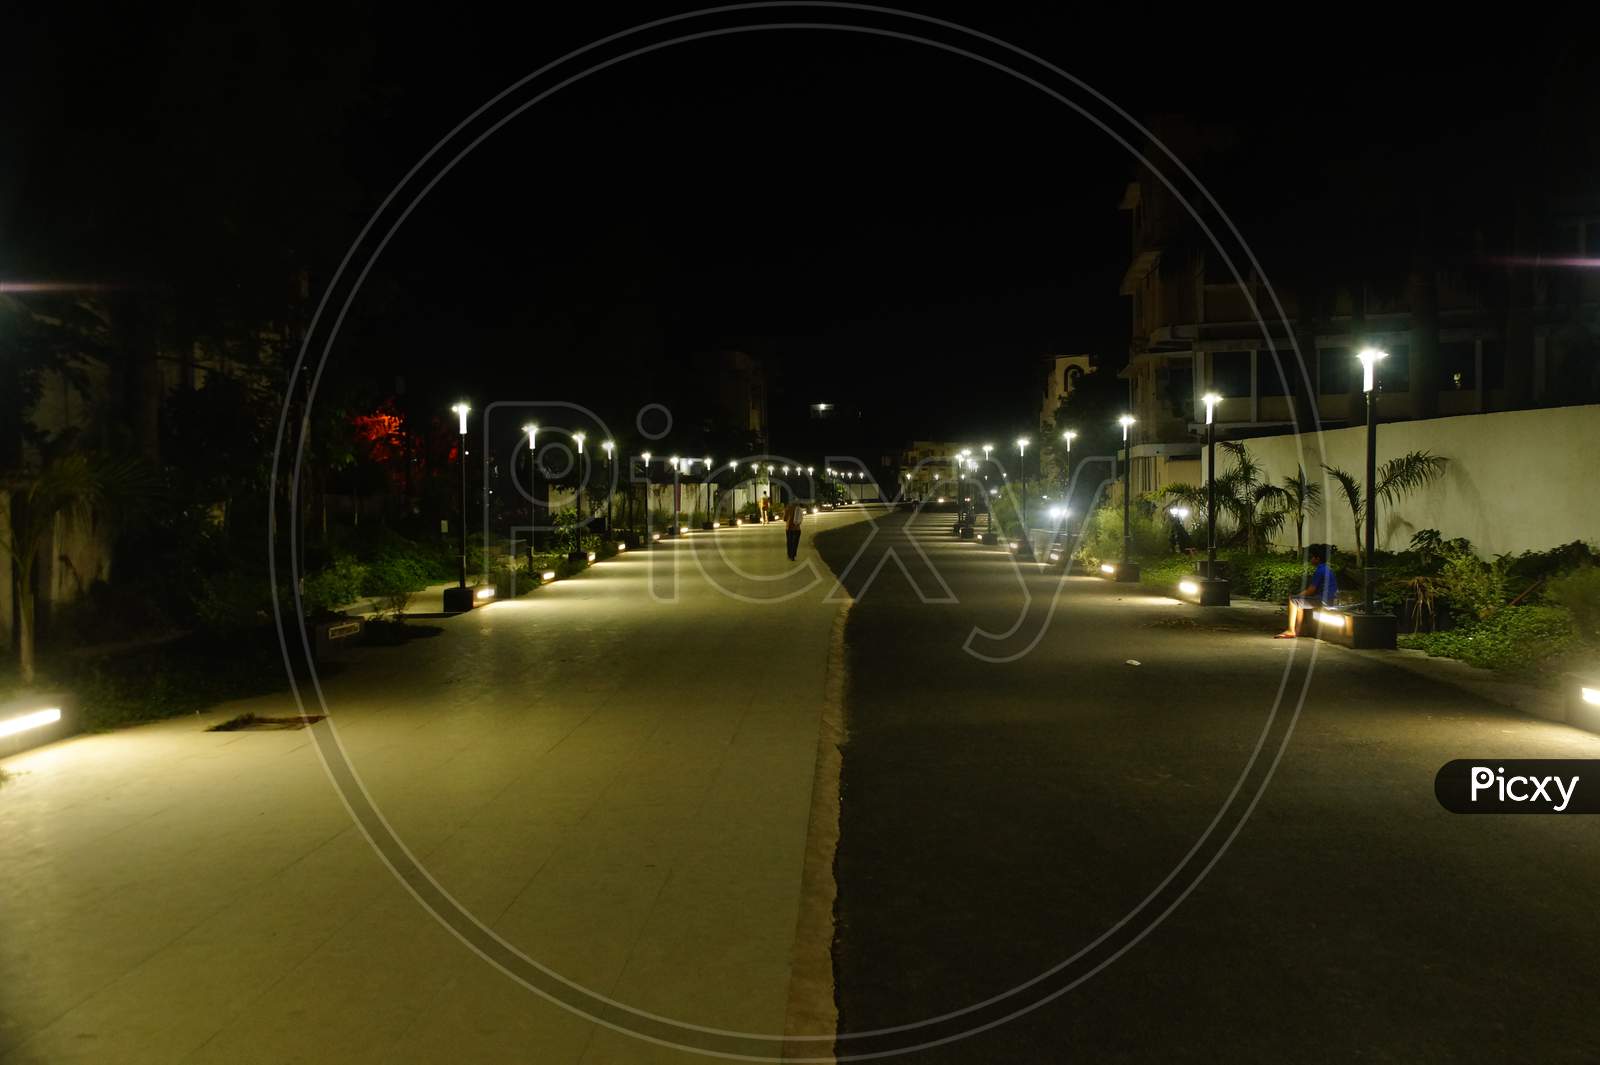 Night view of a walking track made above a sewage tunnel by Jabalpur Smart City Project